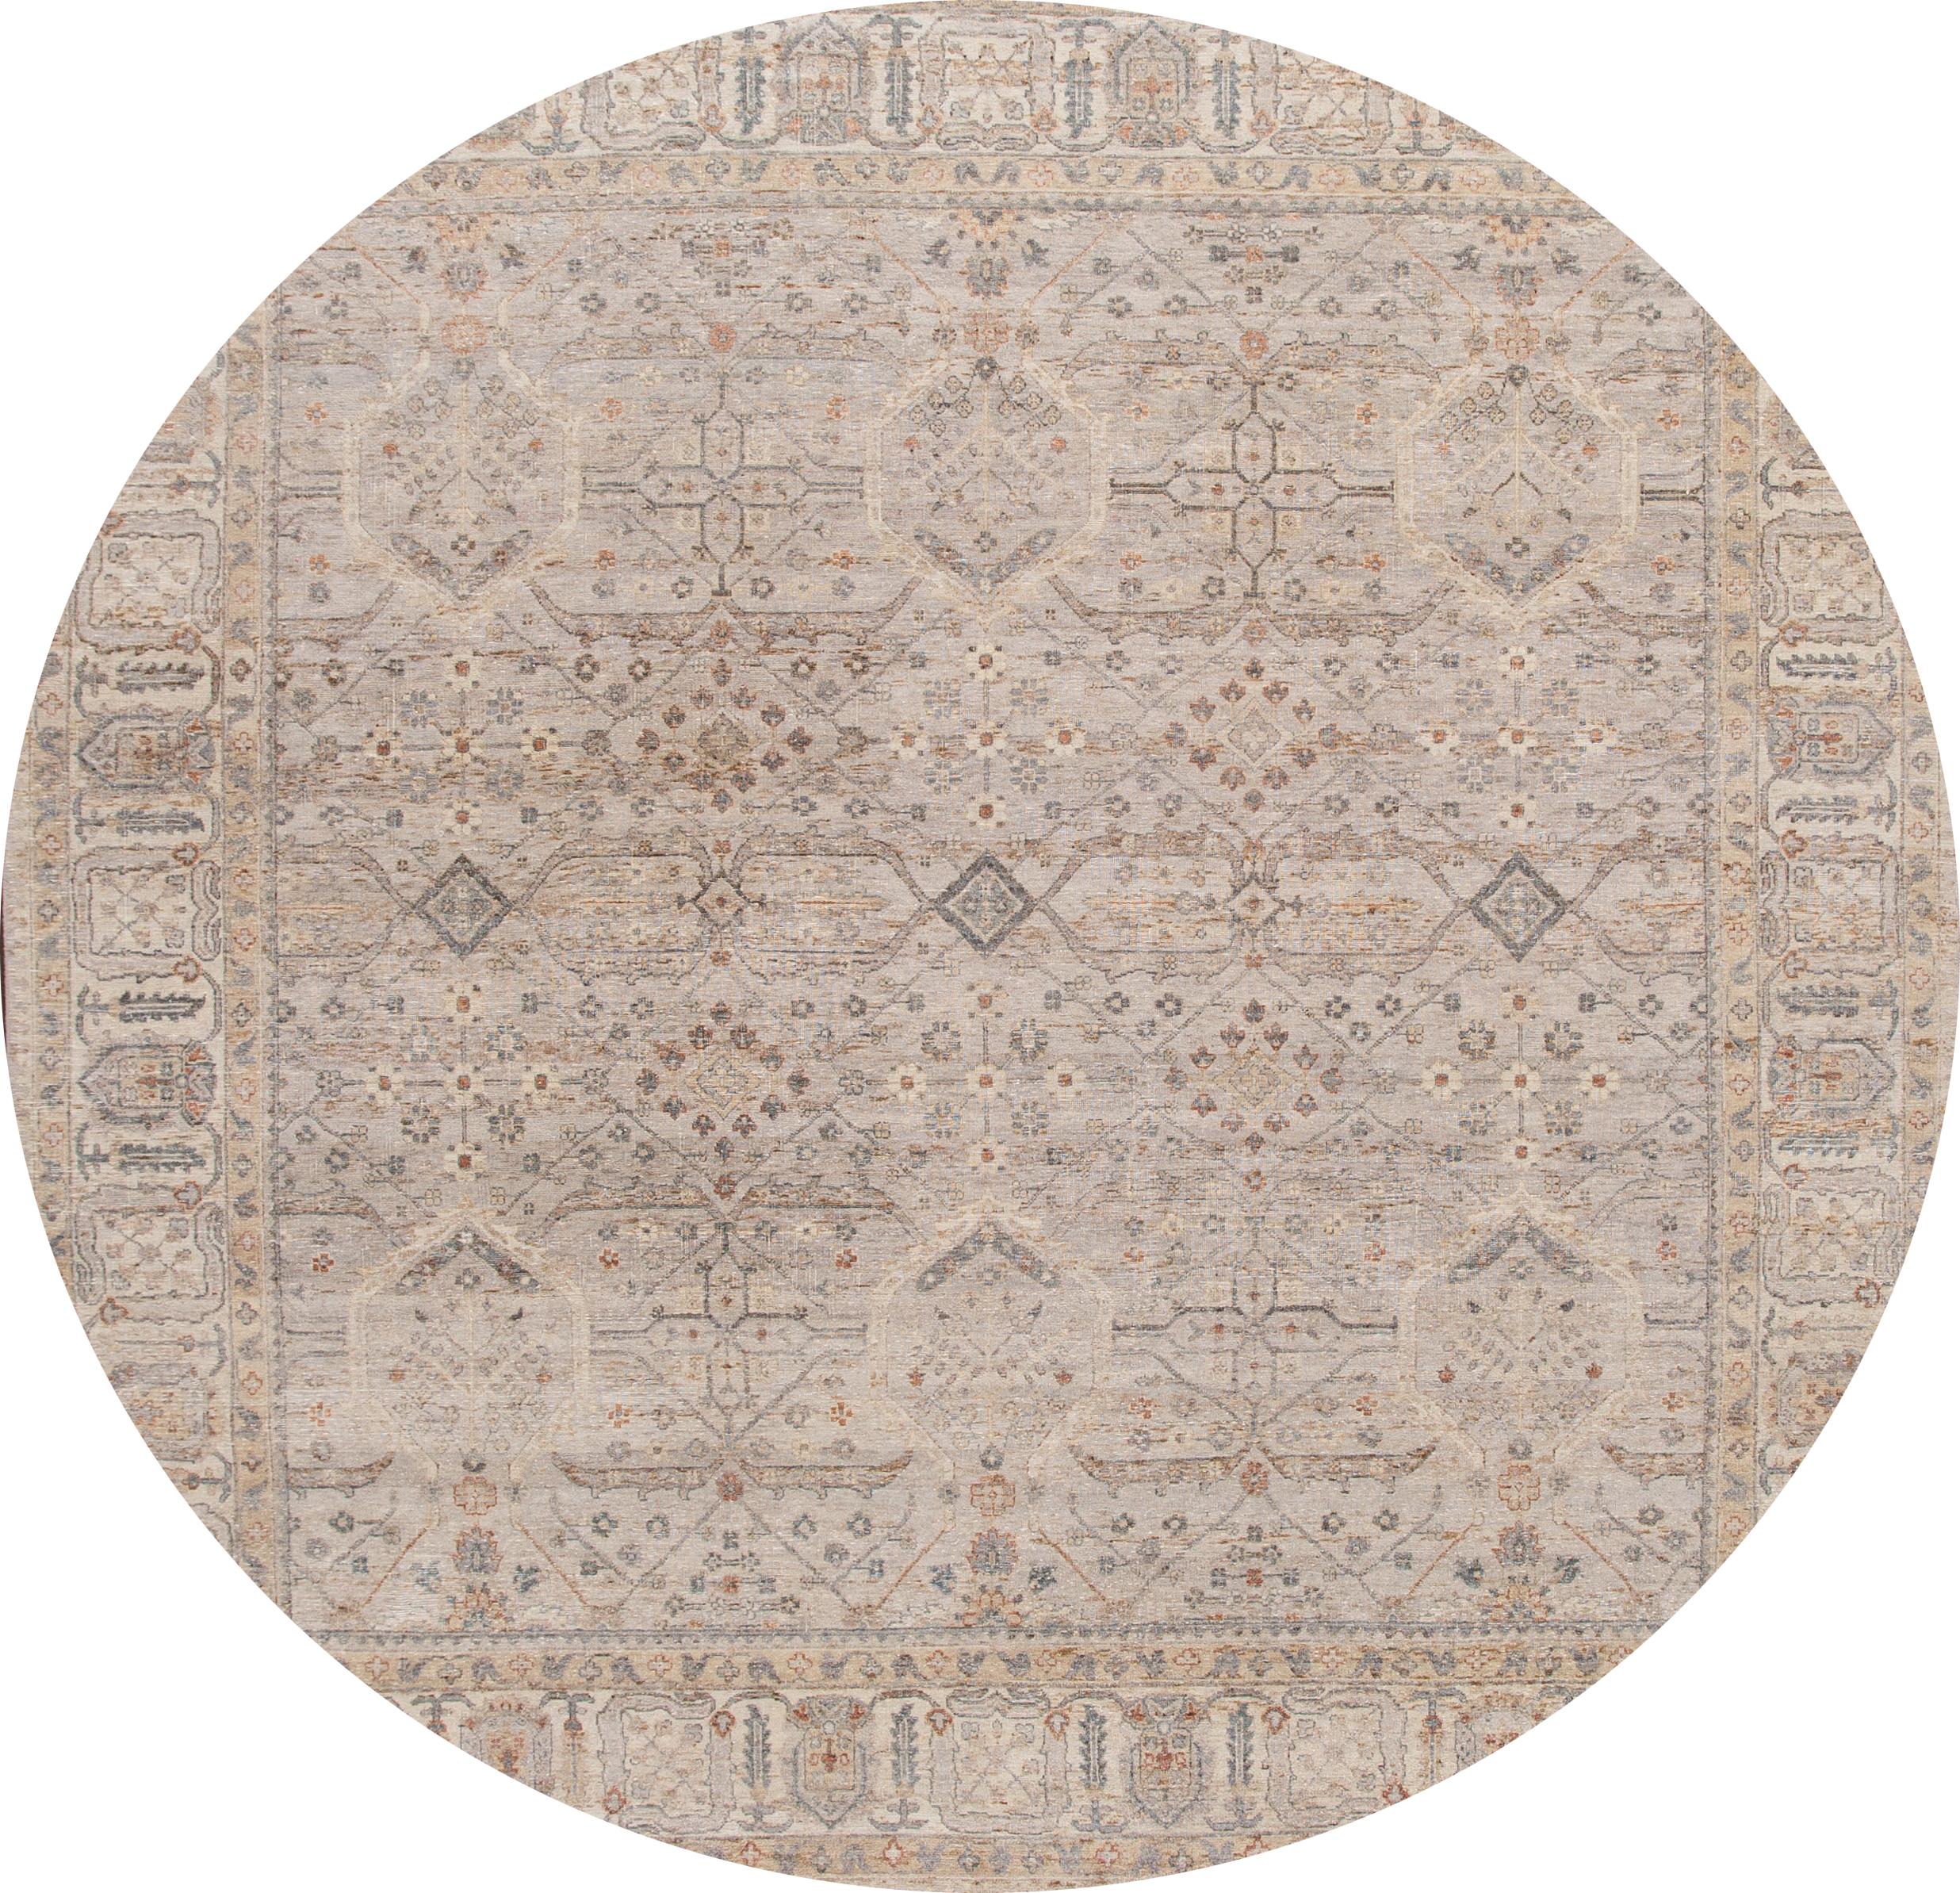 Beautiful modern hand knotted Square Indian wool rug with a beige field, ivory, brown, and peach accents with an all-over geometric design.

This rug measures 10' 1